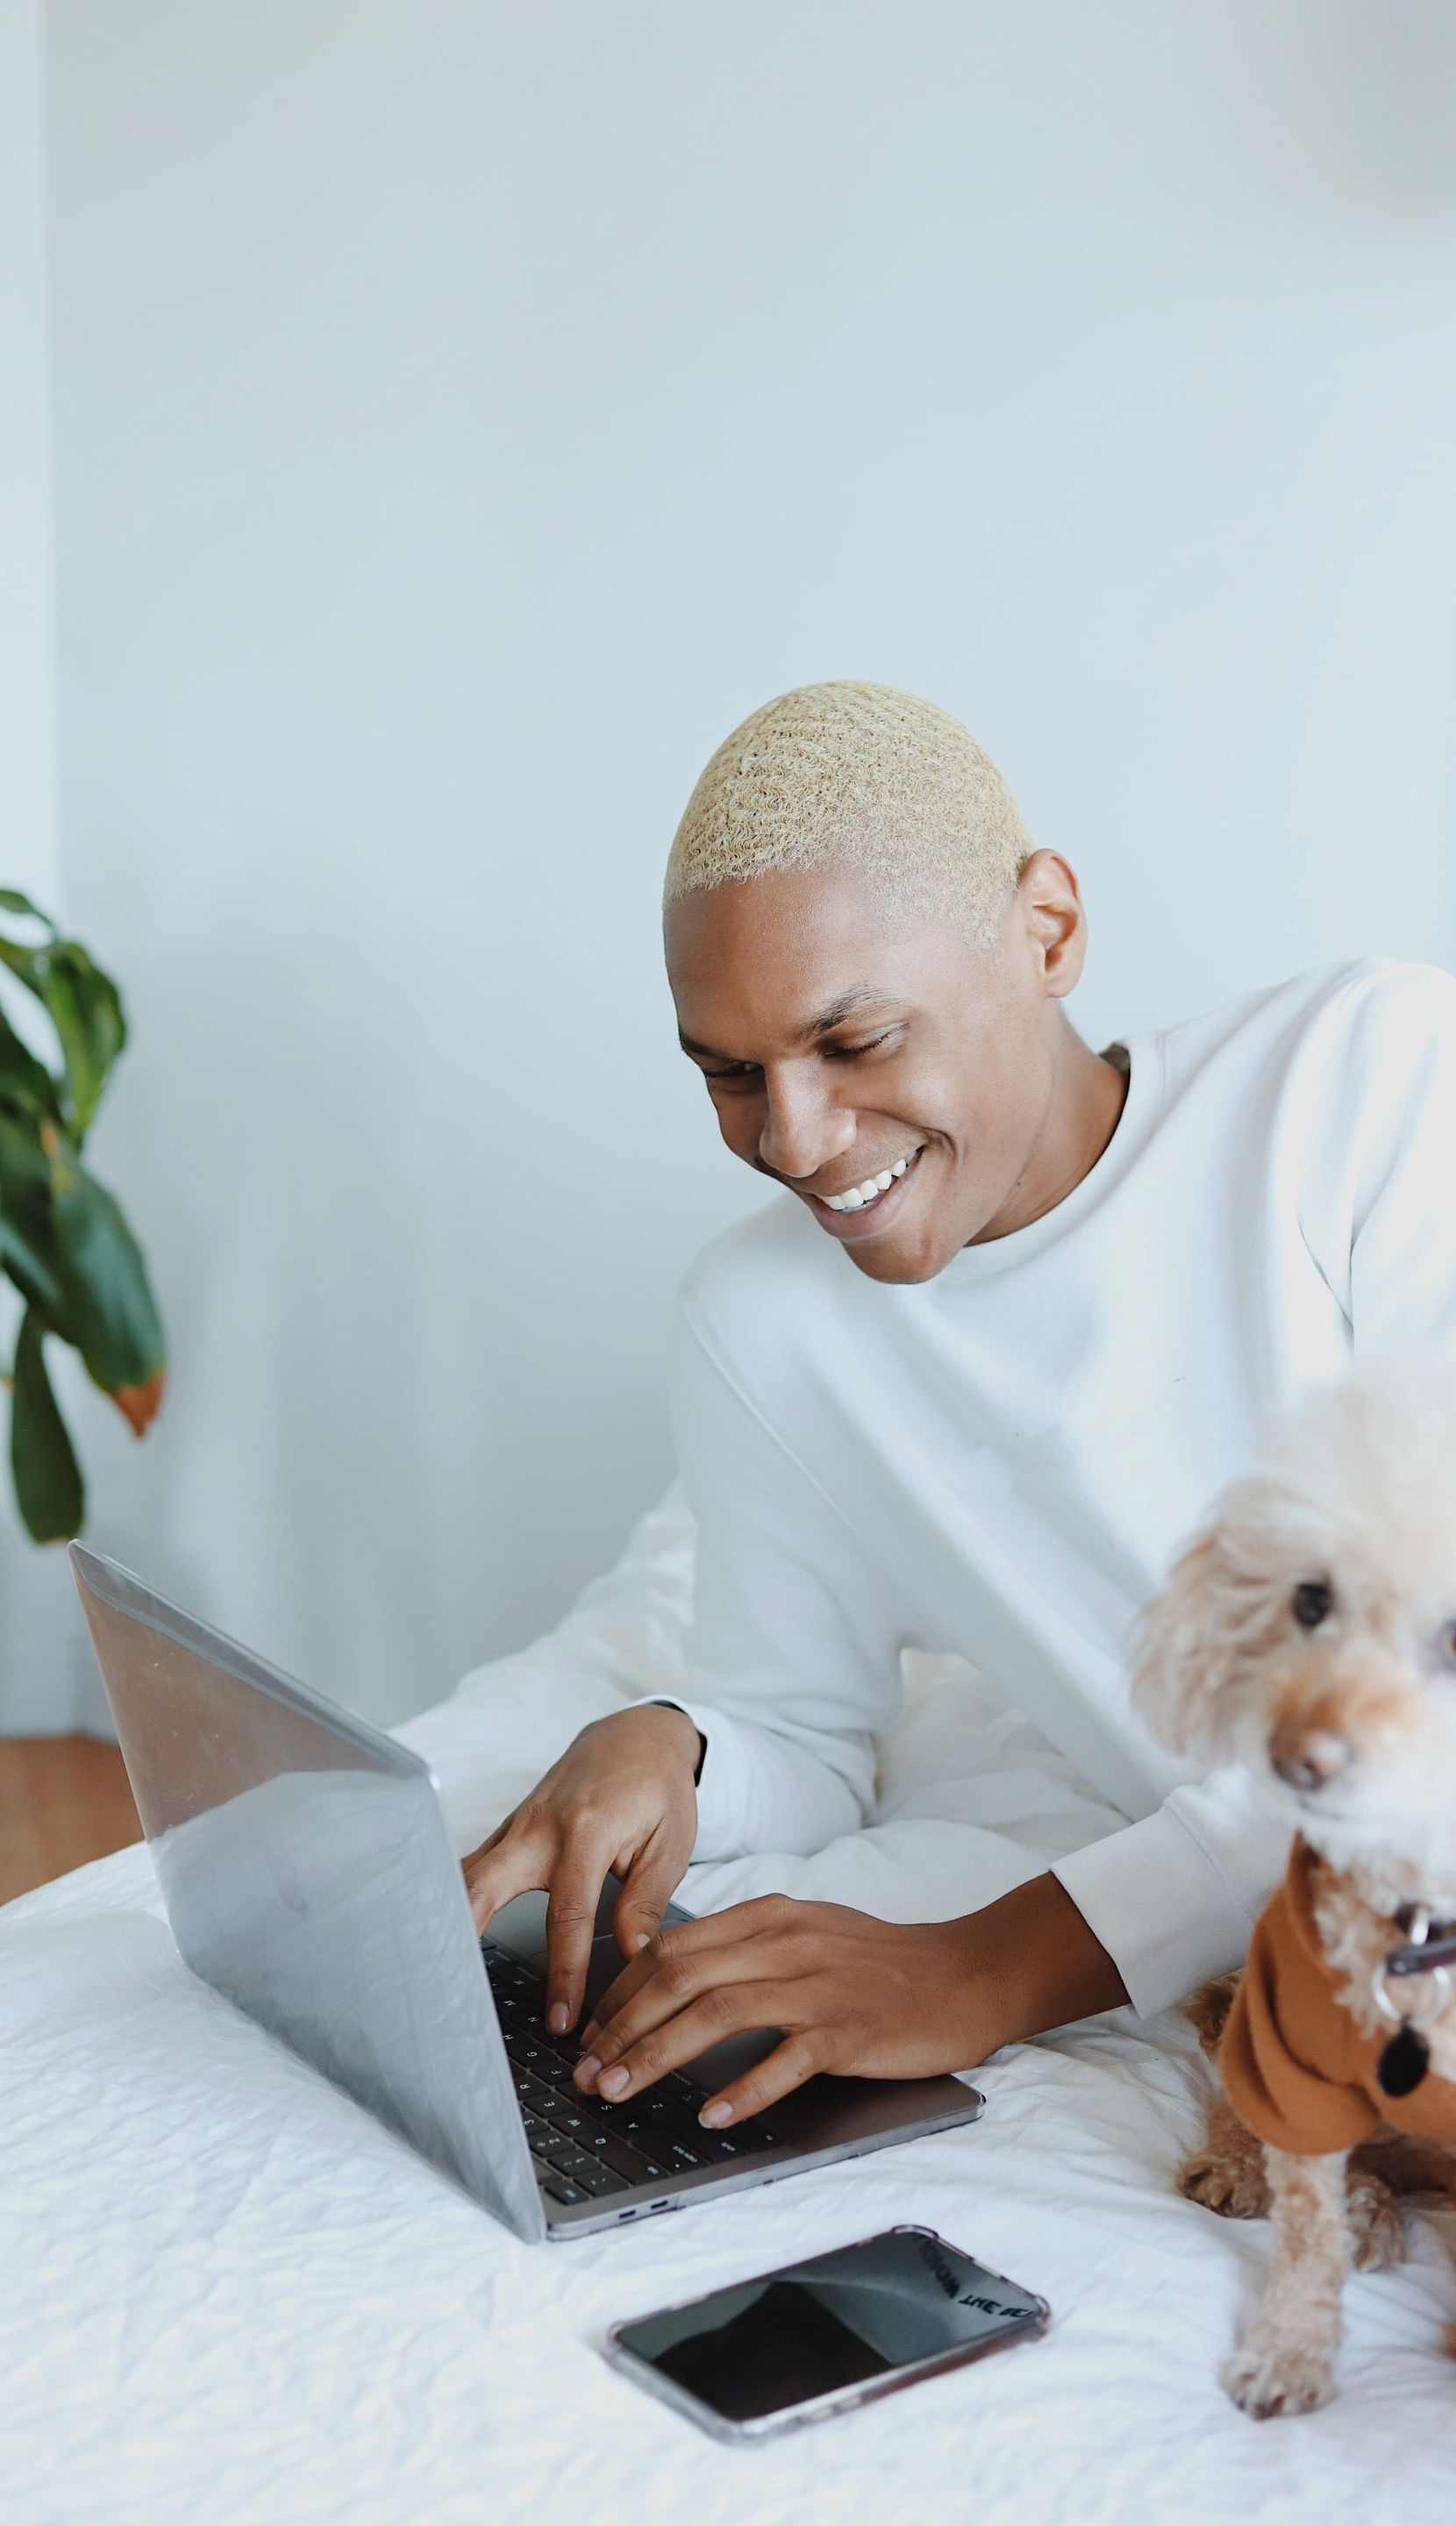 man on laptop with dog